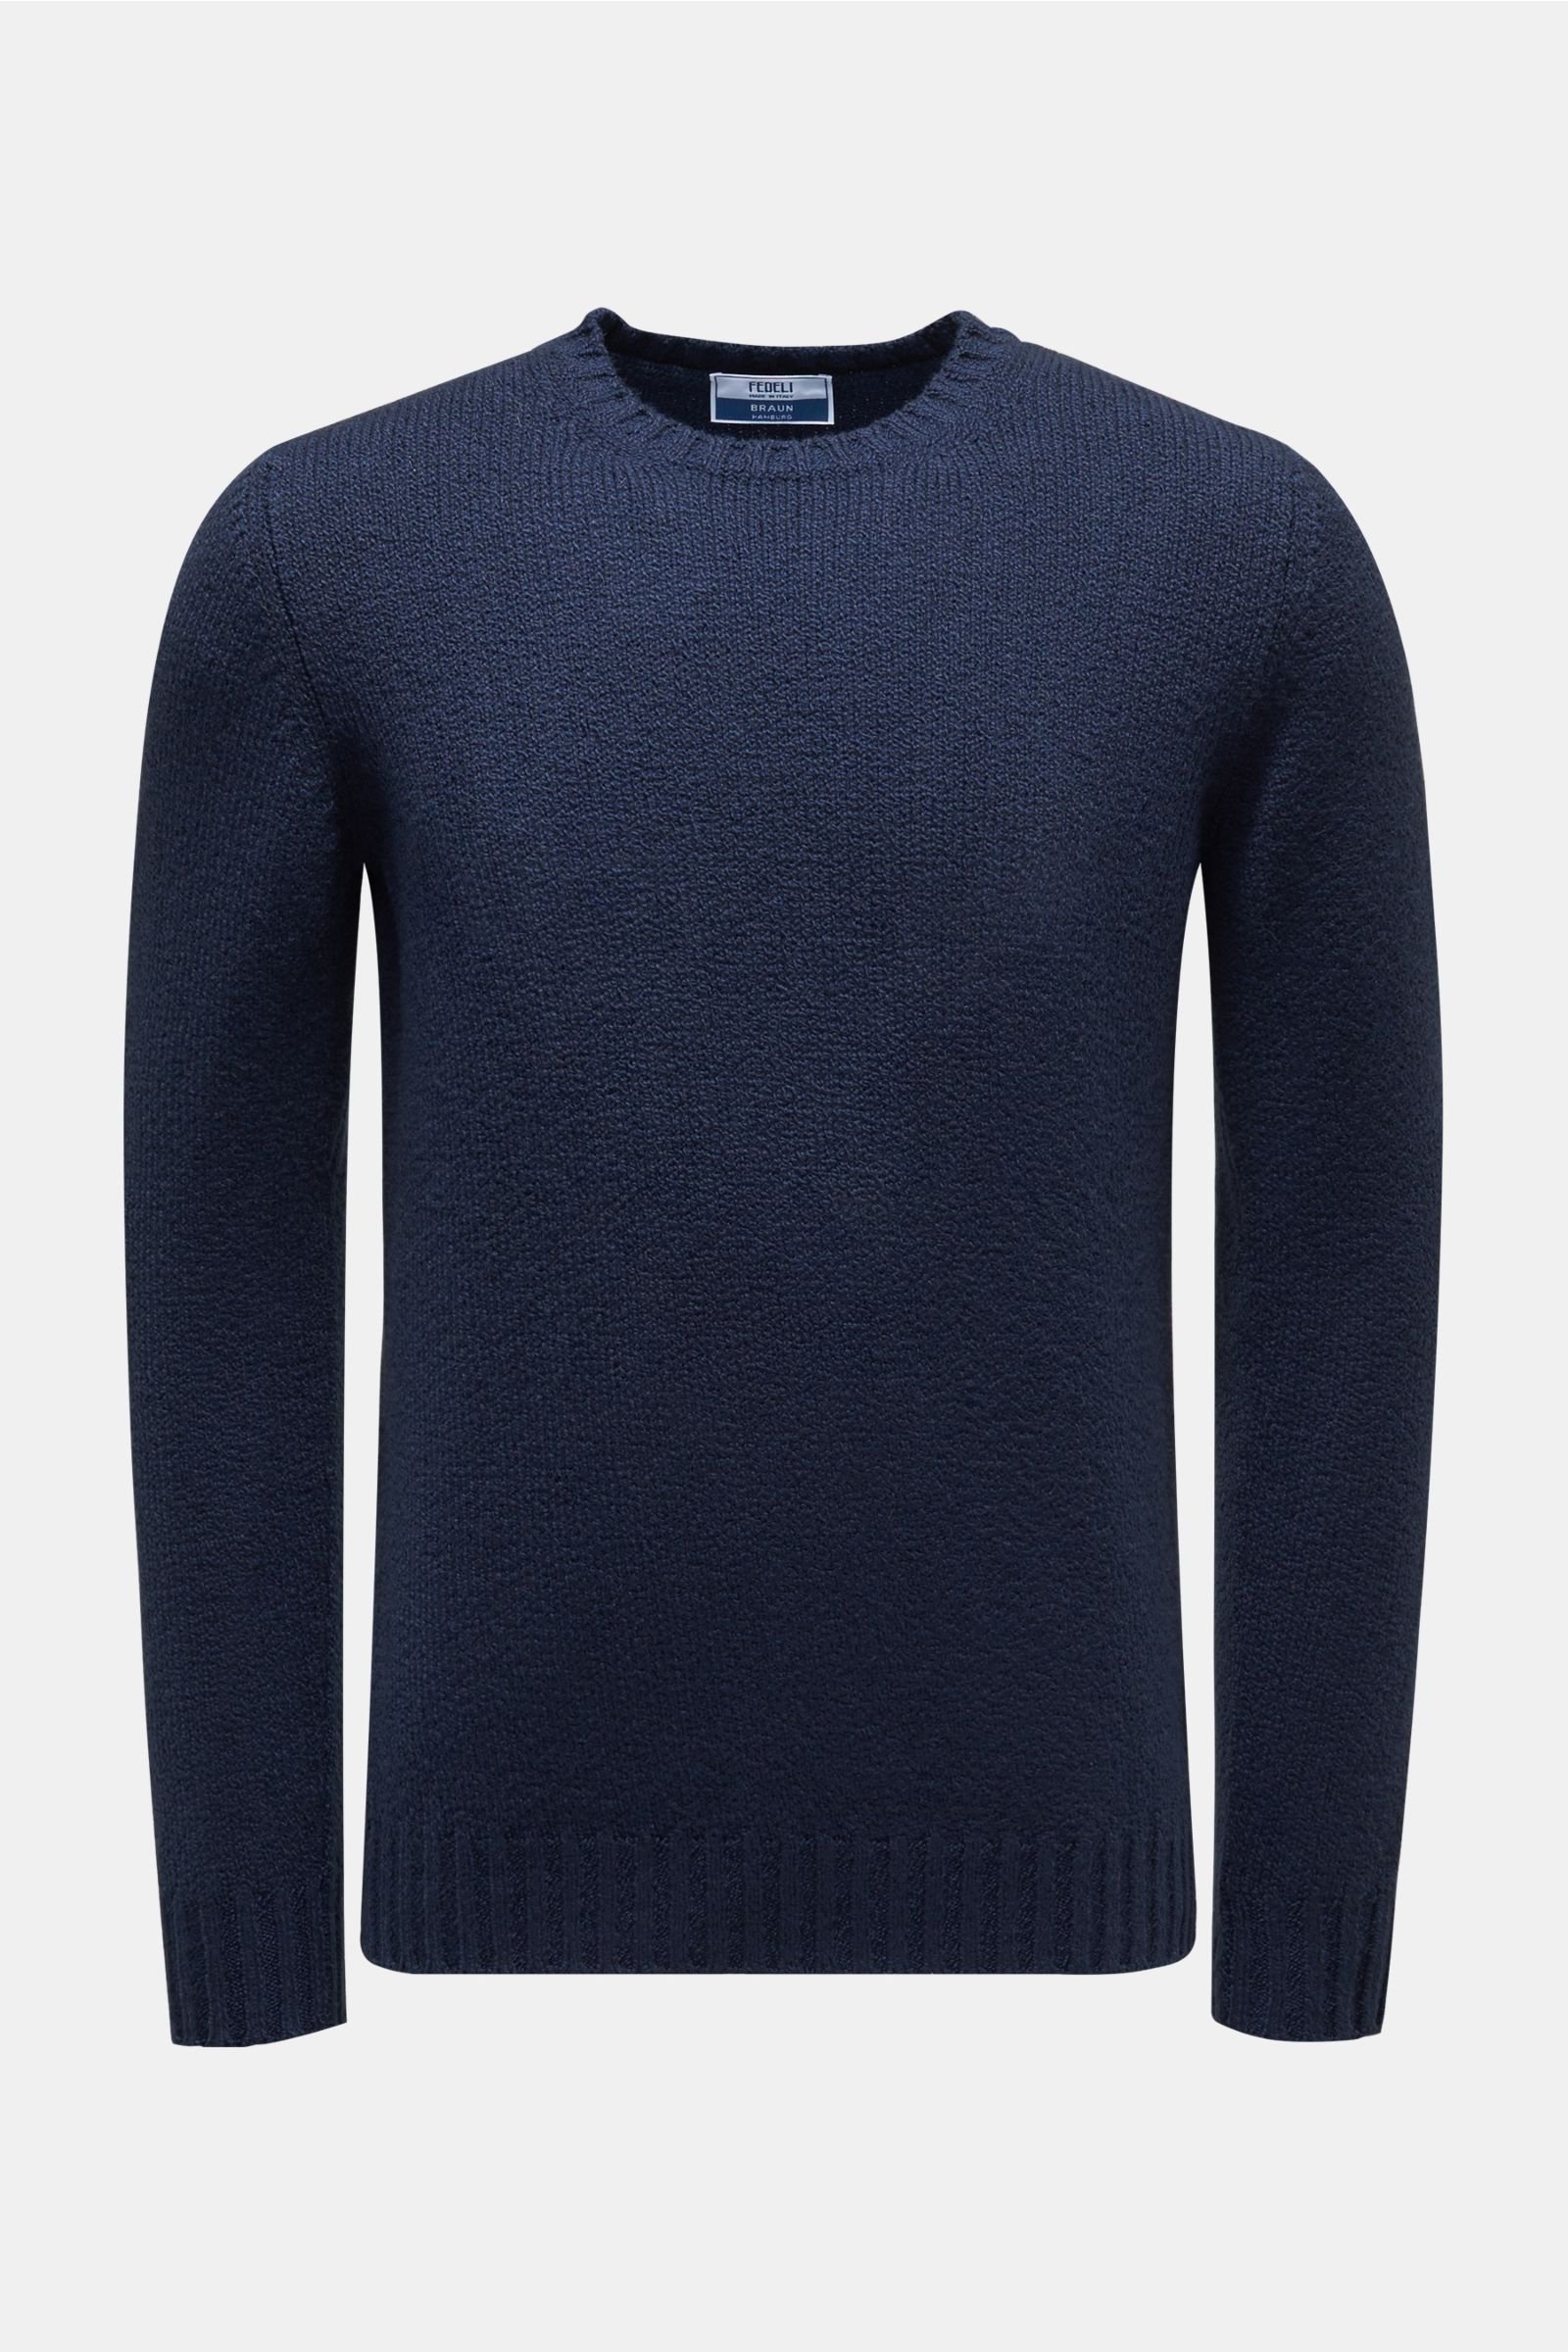 R-Neck Pullover 'Papyrus Dusty' navy